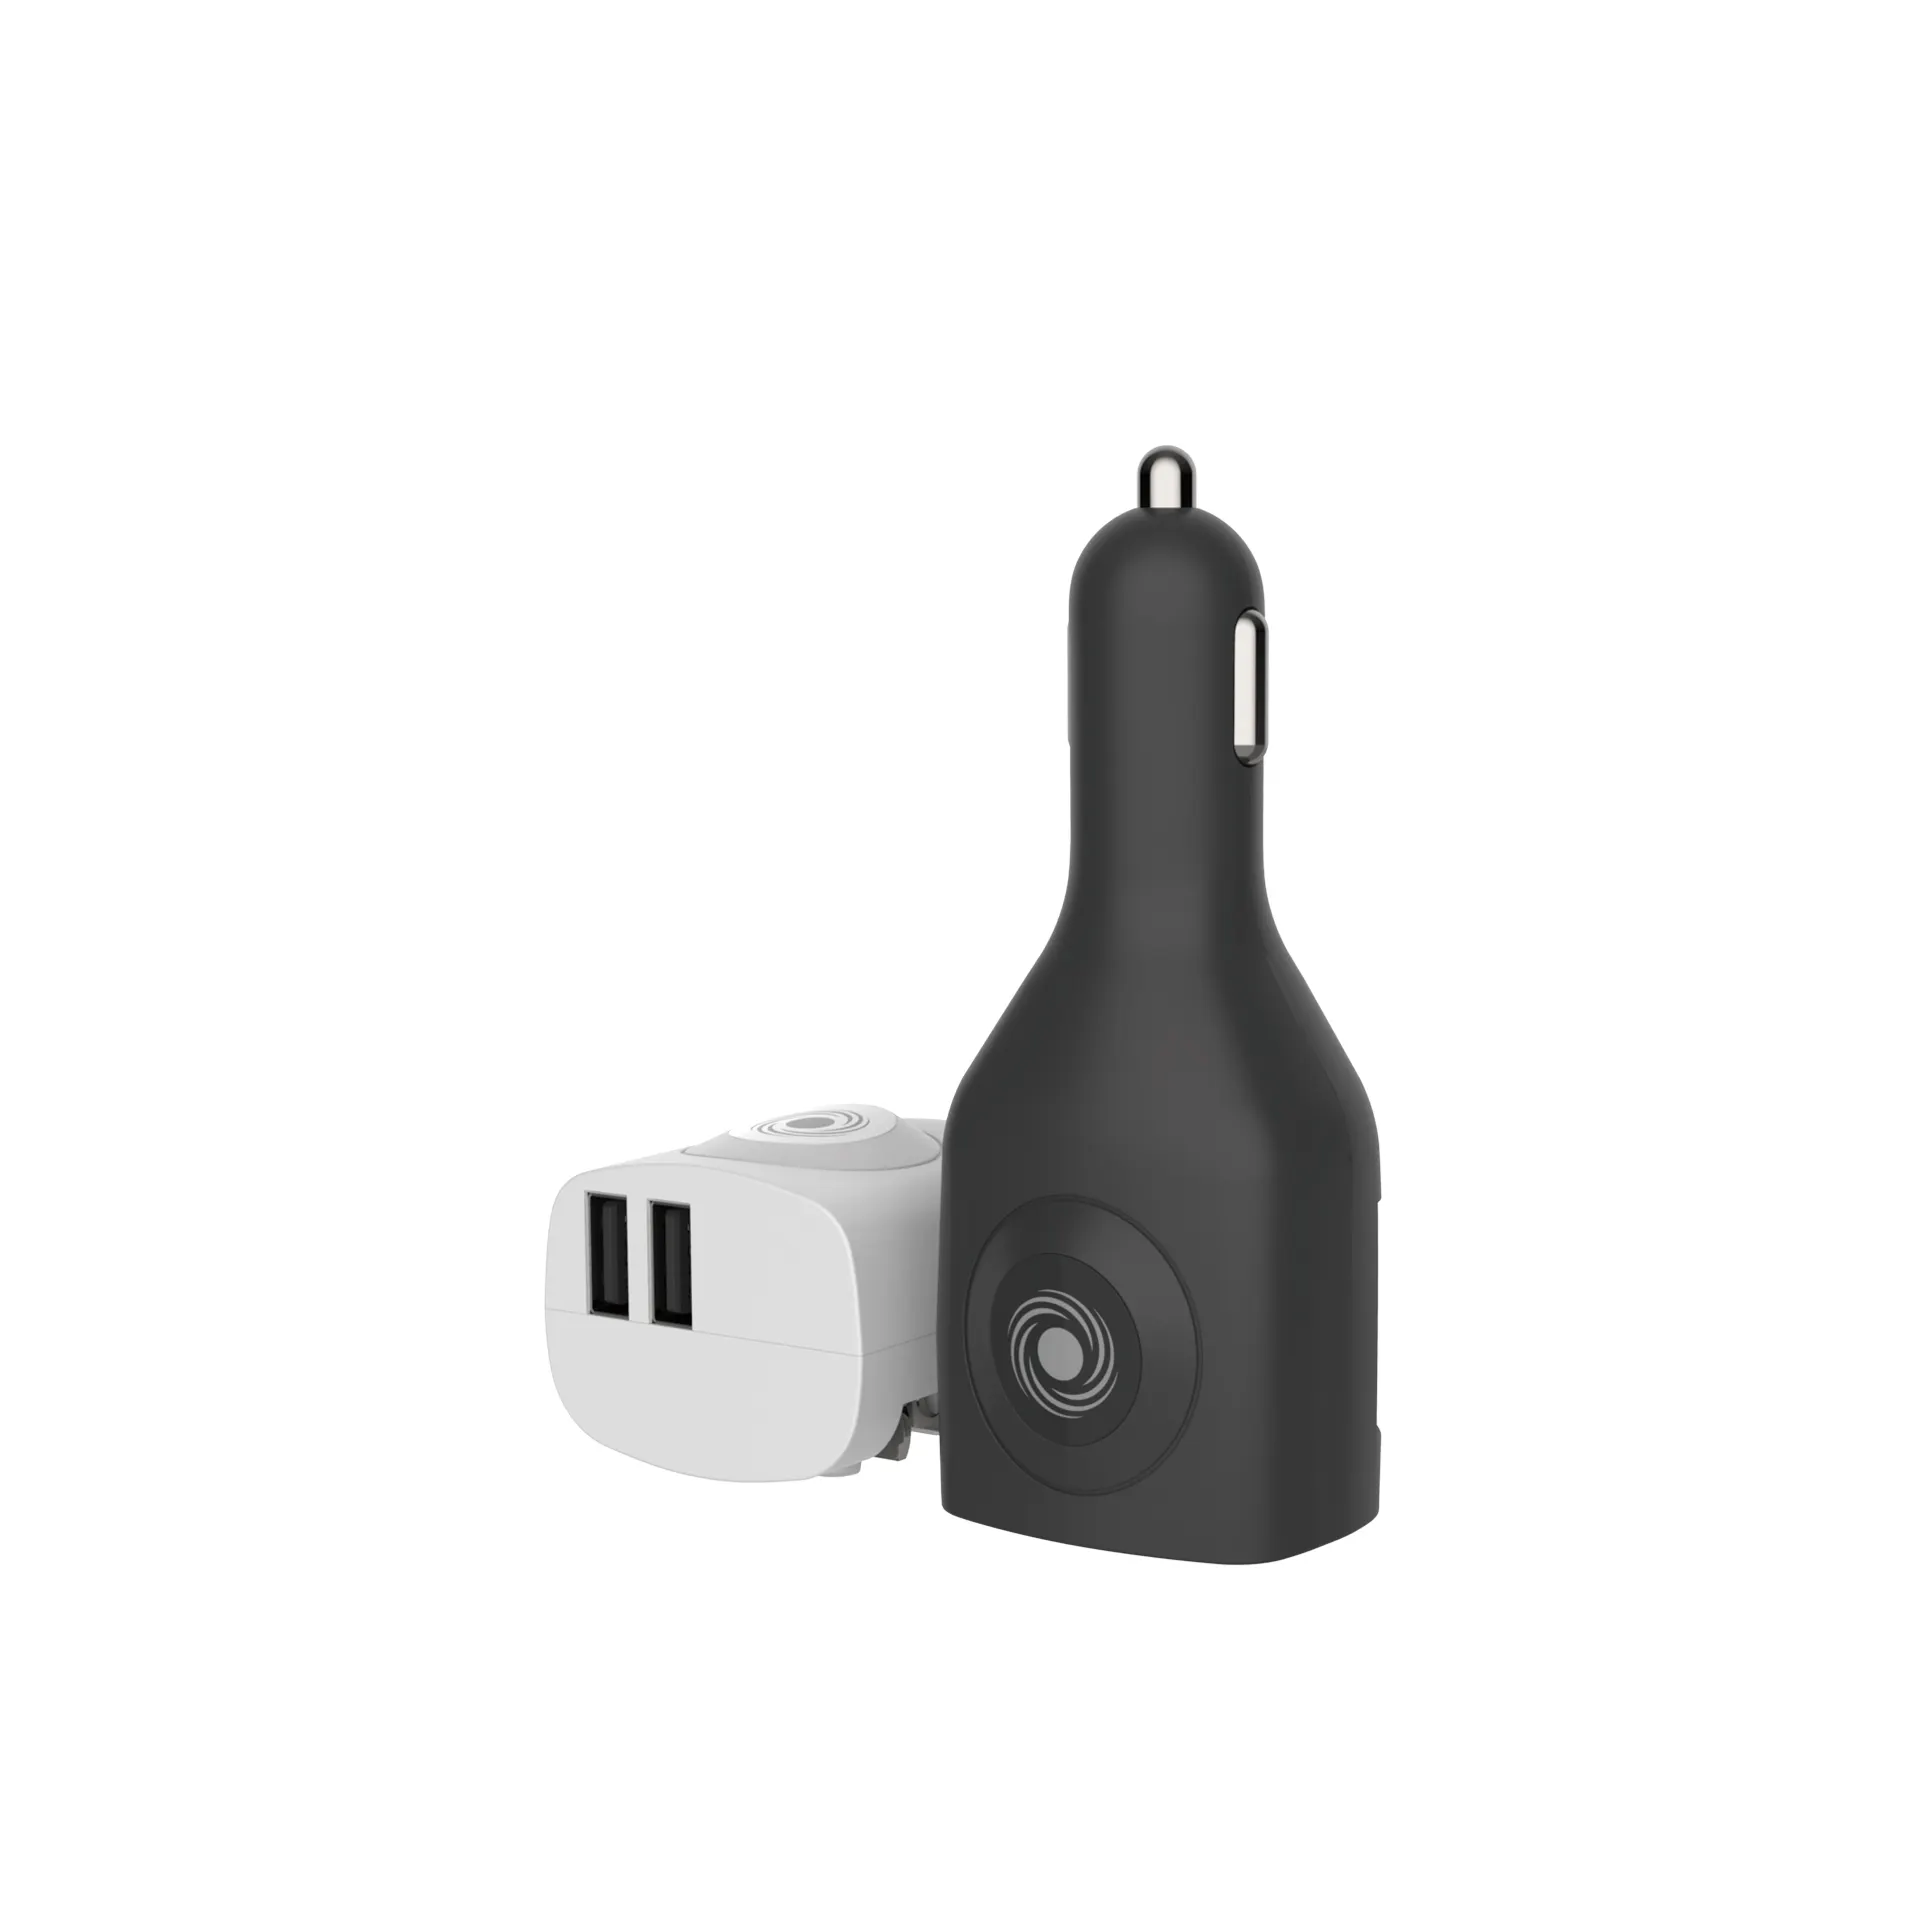 Car Charger Usb Adapter Mobile Dual Folding for Usb Accessories Travel Wall for Android Phone Cell 2 in 1 10.5W Charger